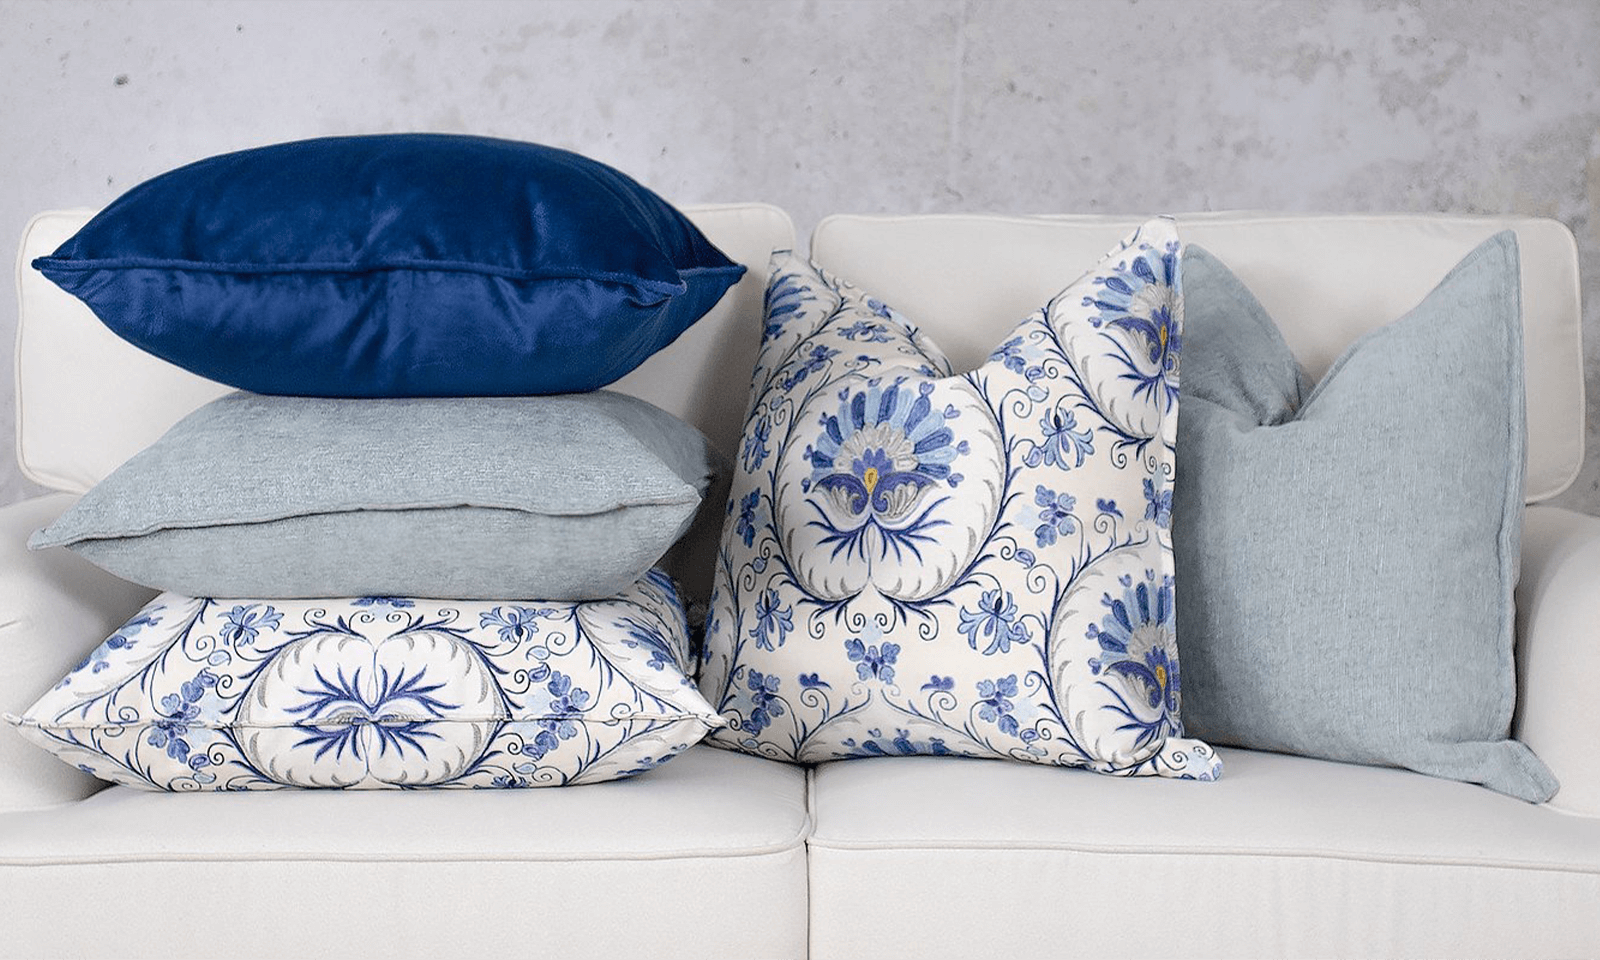 HOW TO MIX AND MATCH CUSHIONS